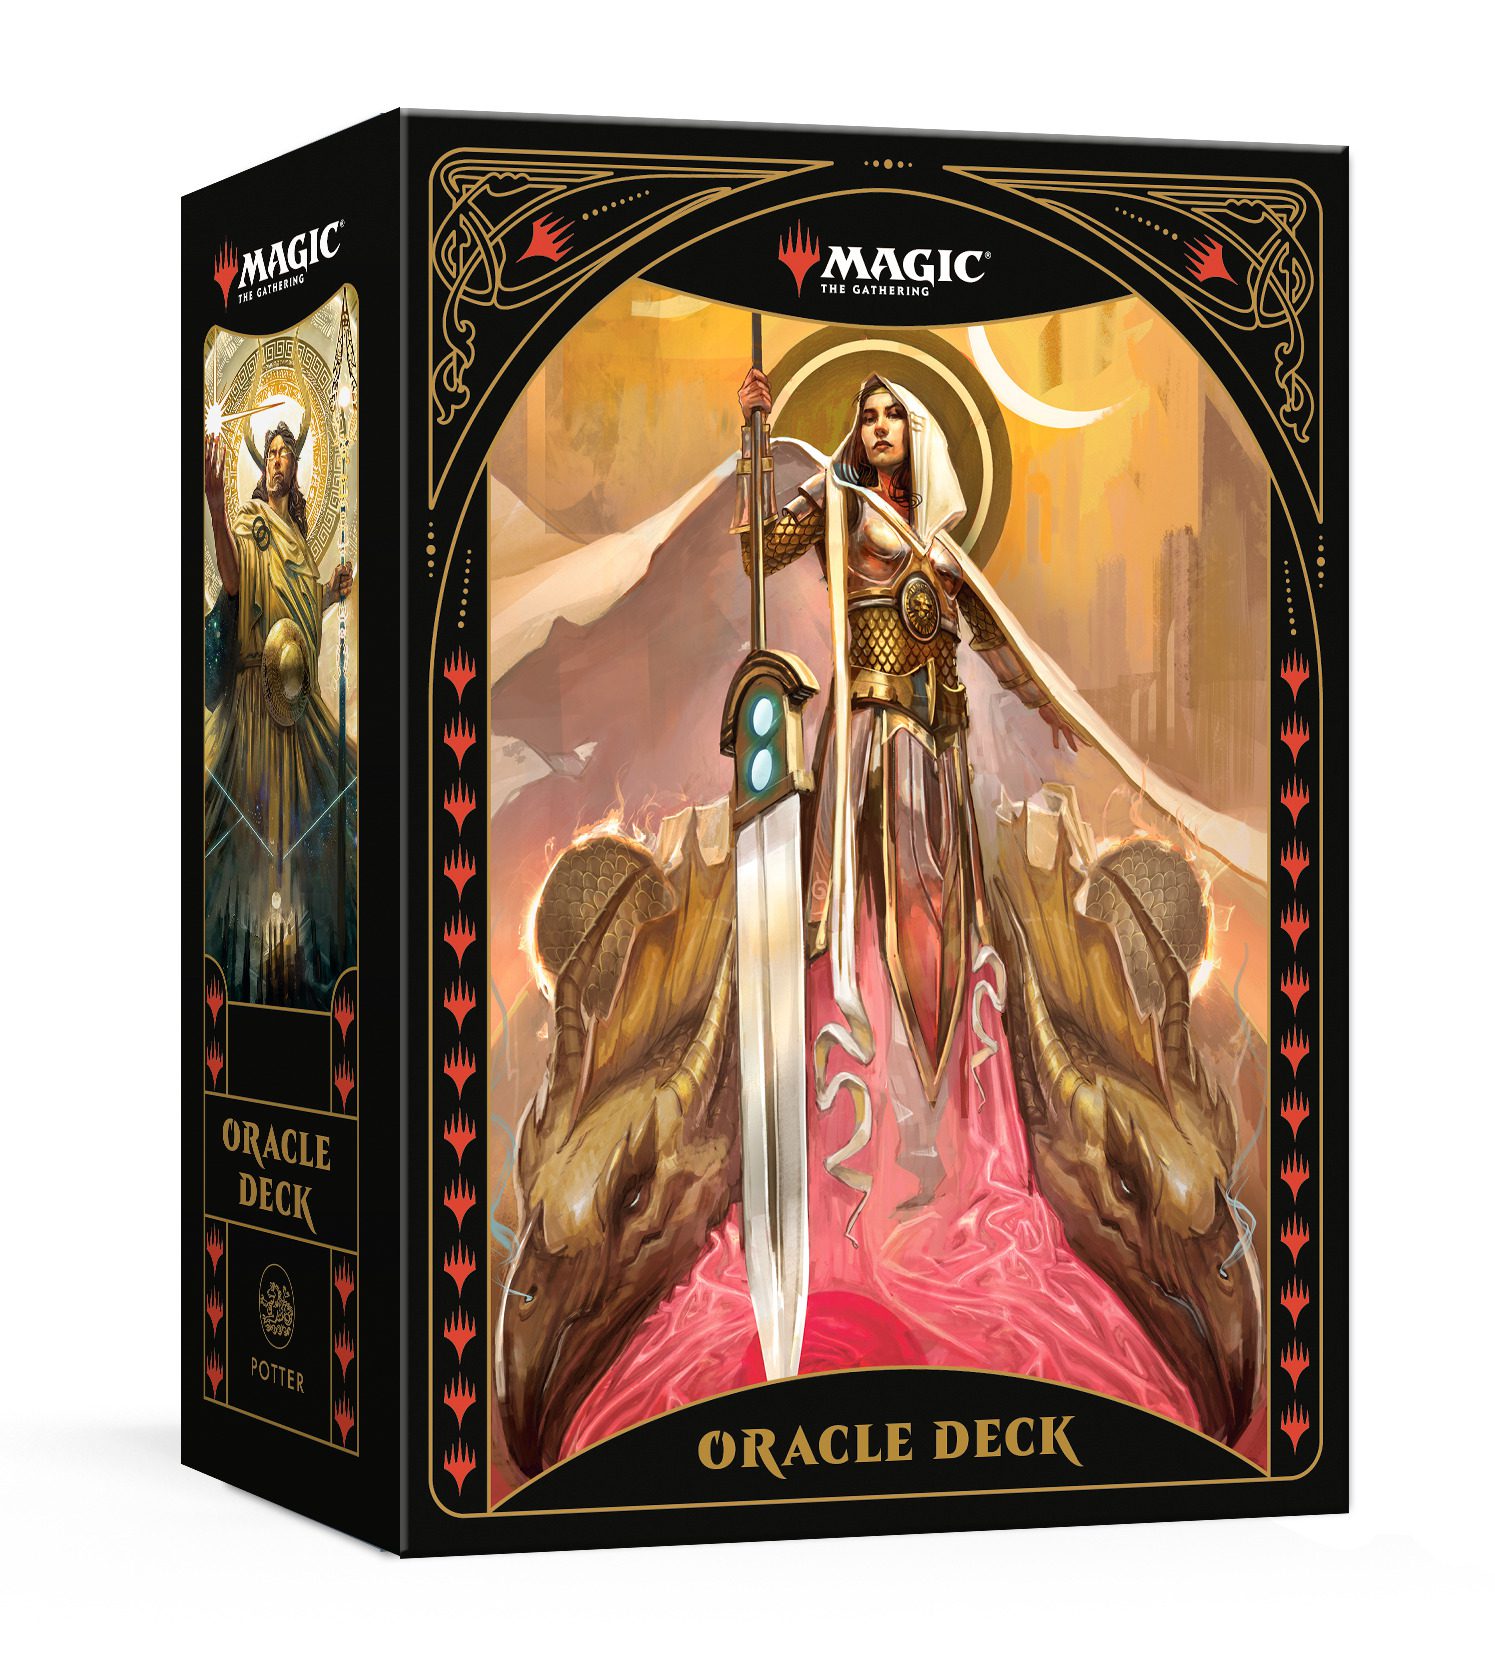 Magic: The Gathering Oracle Deck Box